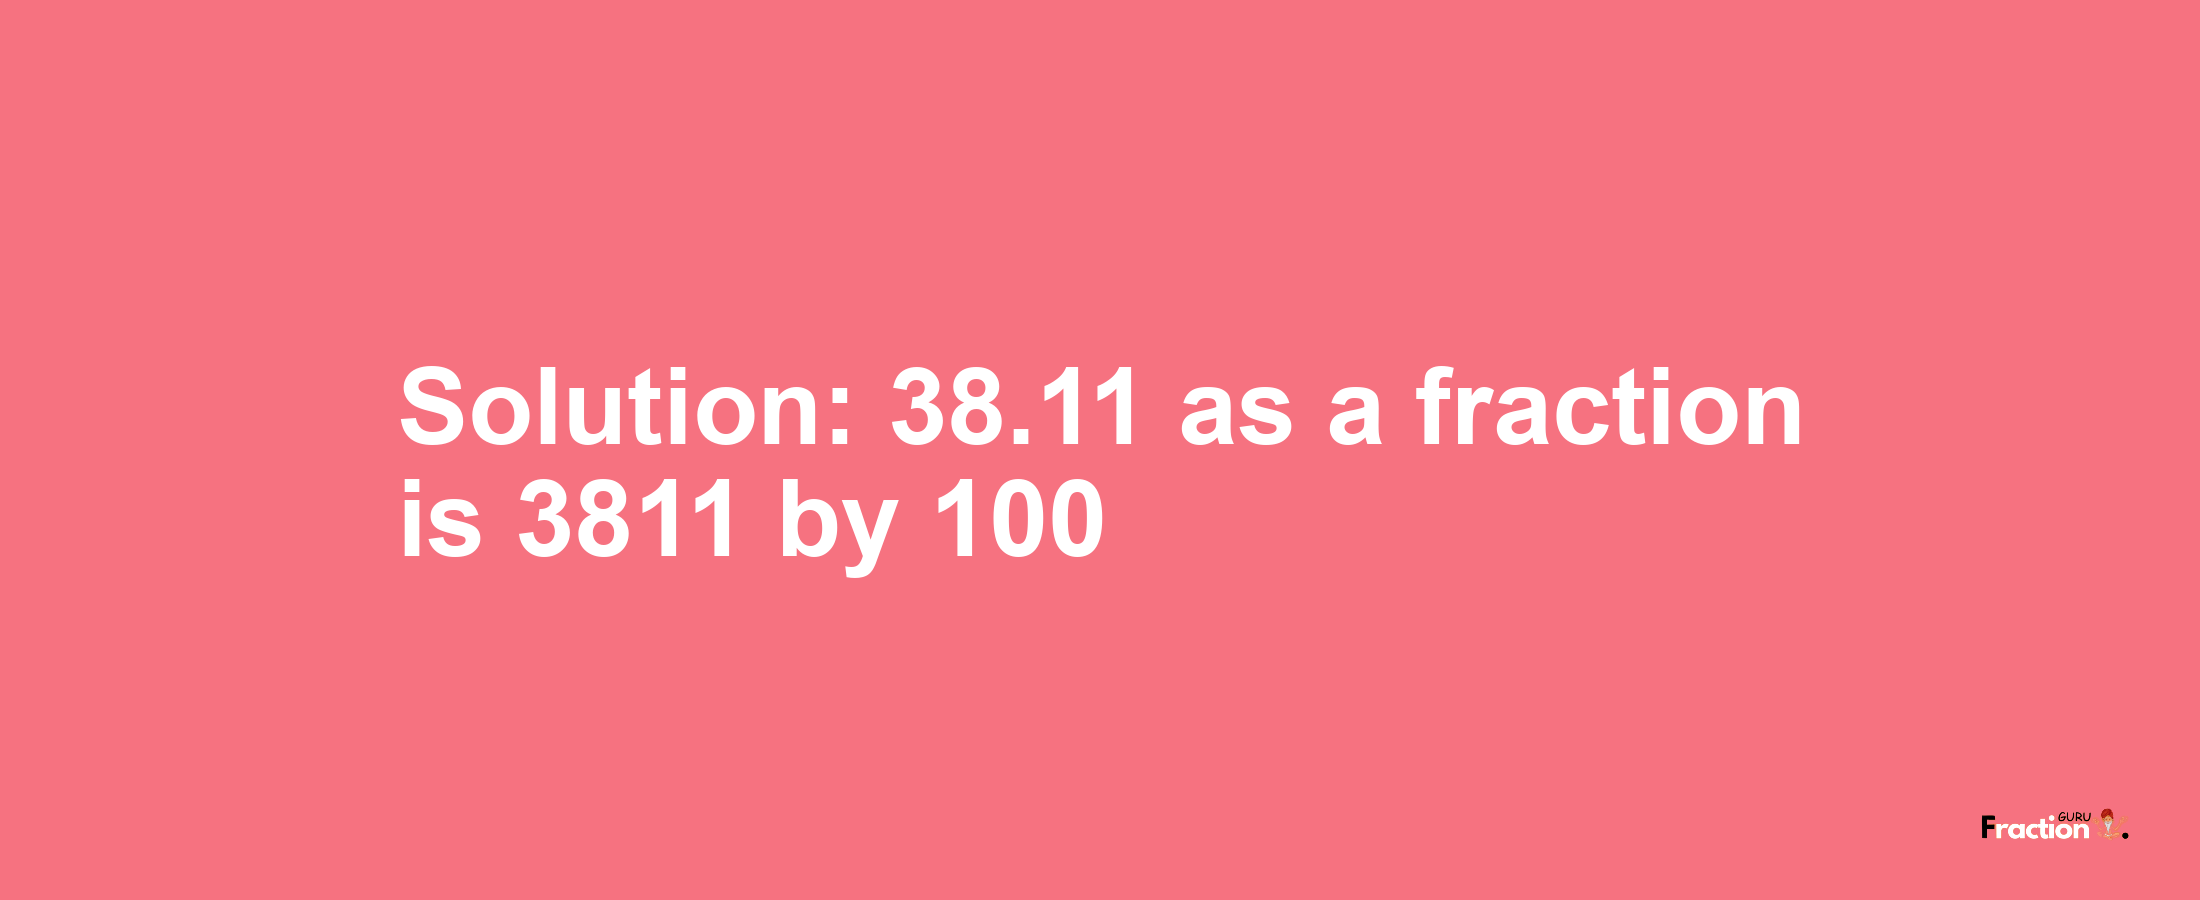 Solution:38.11 as a fraction is 3811/100